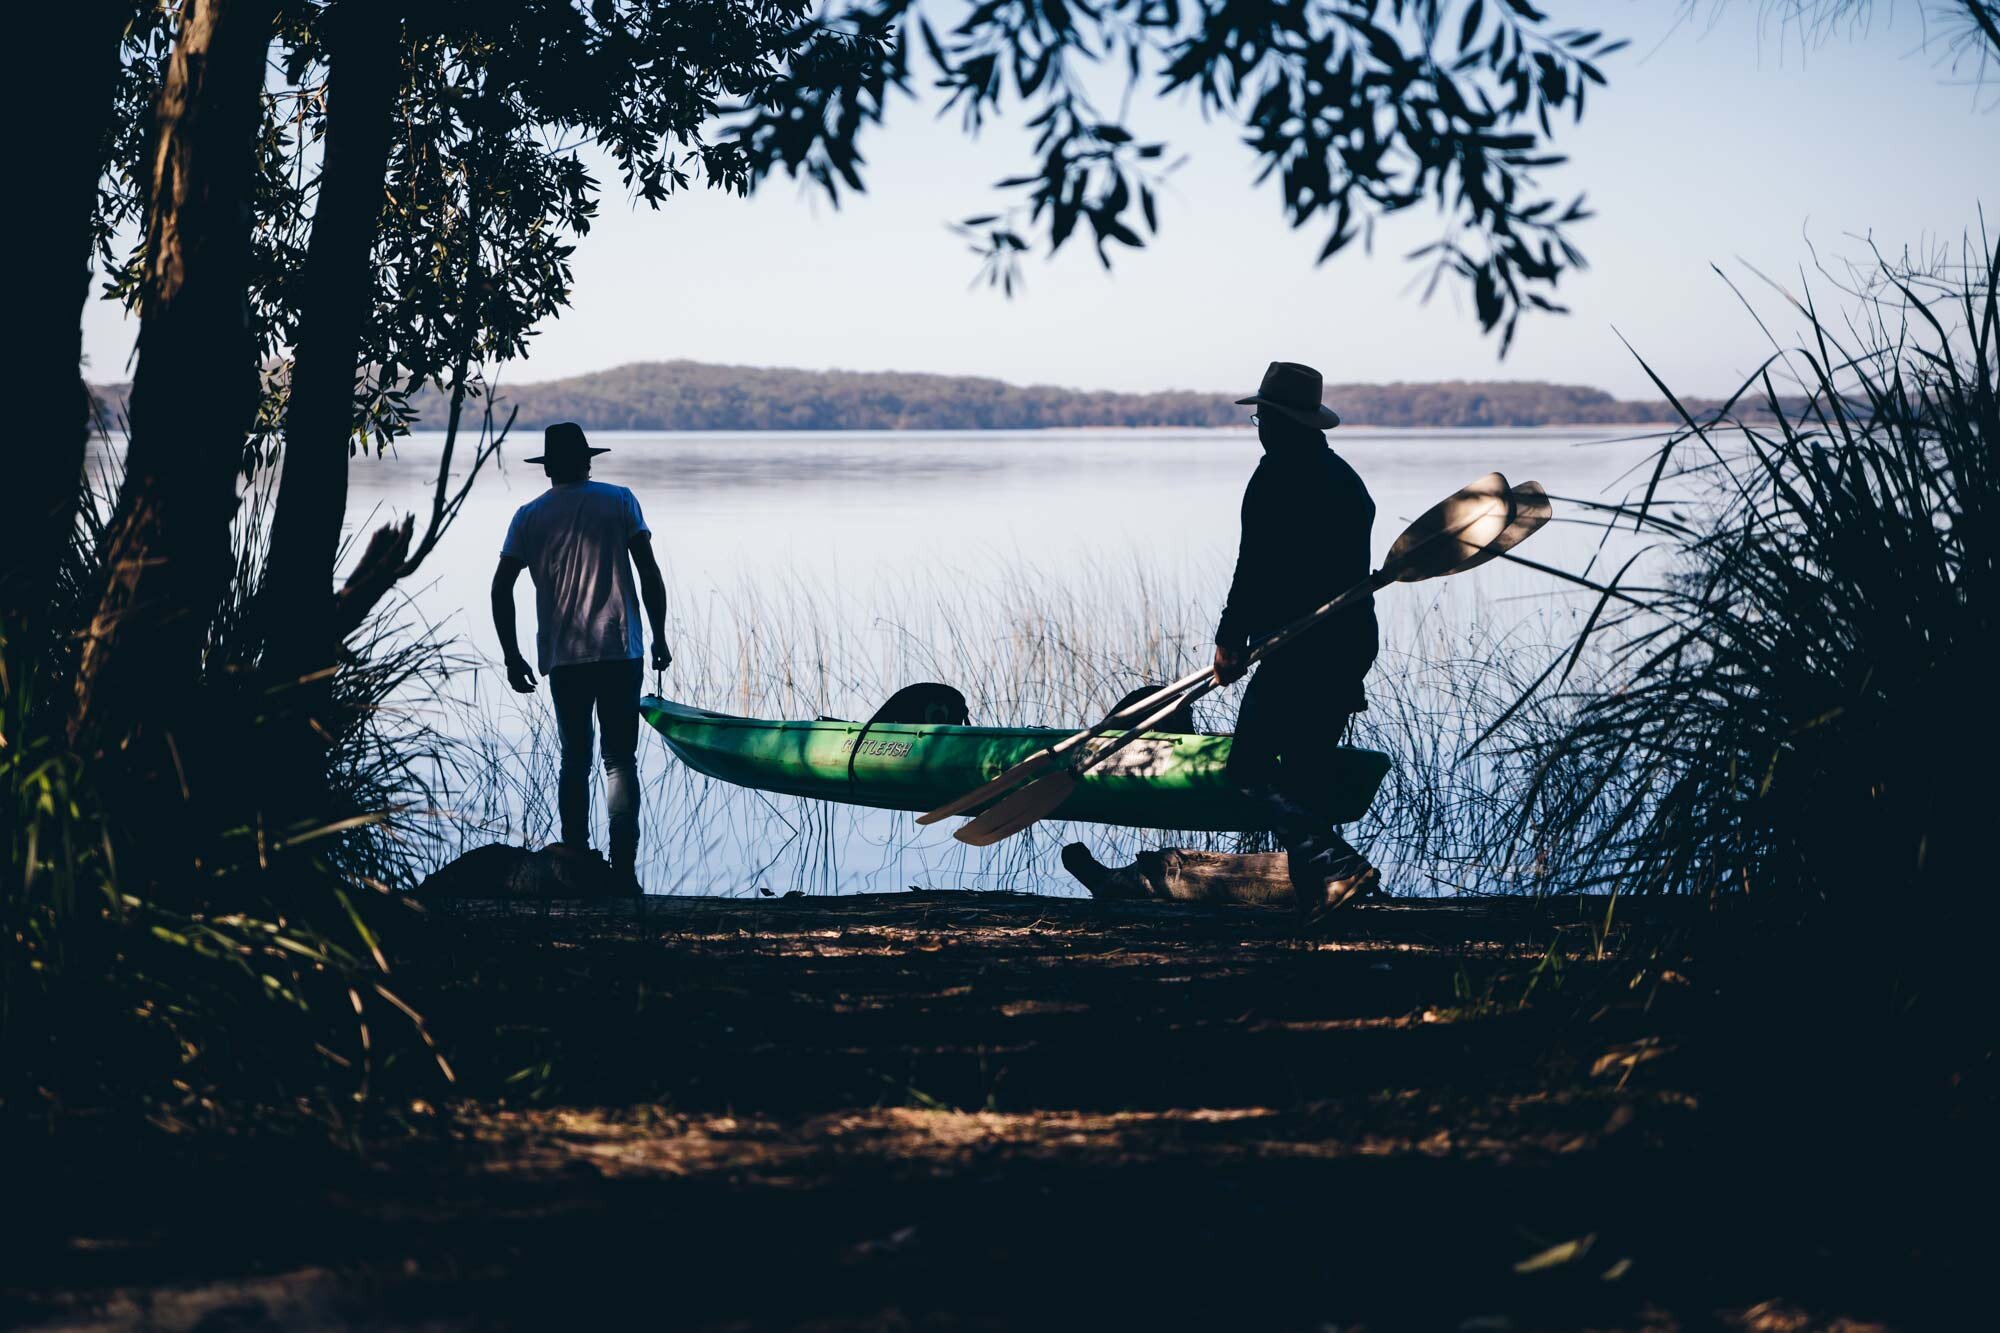  Find yourself in…   The Myall Lakes National Park    Explore the destination  